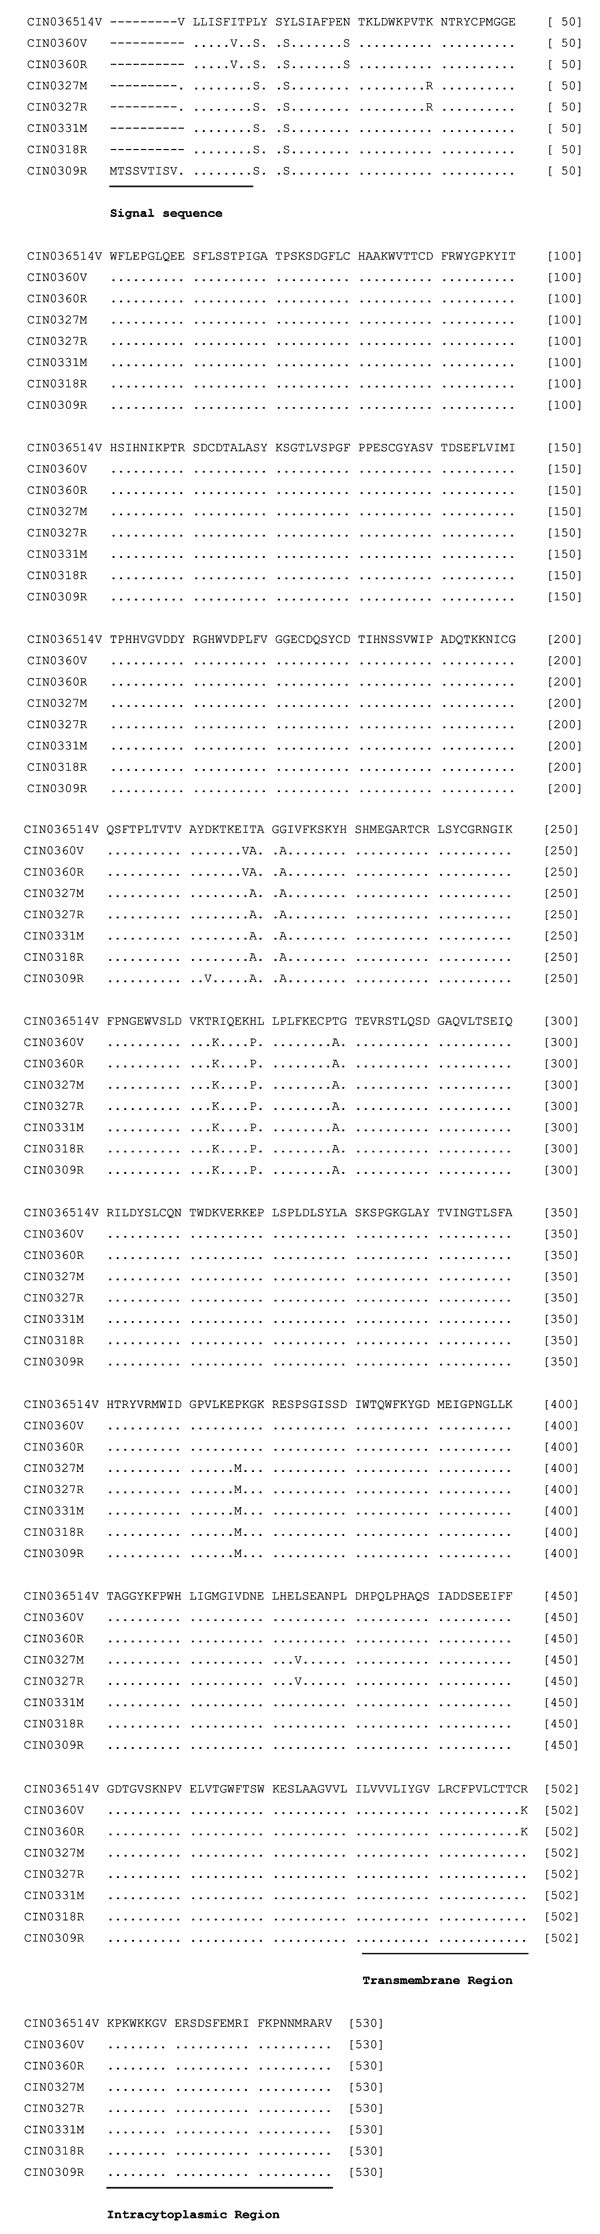 Alignment of the deduced amino acid sequences of the G protein of different isolates of Chandipura virus. For details on isolates, see Table 1. Solid bars represent signal sequence (1–18 amino acids [aa]), transmembrane region sequence (482–502 aa), and the intracytoplasmic region sequence (503–530 aa).